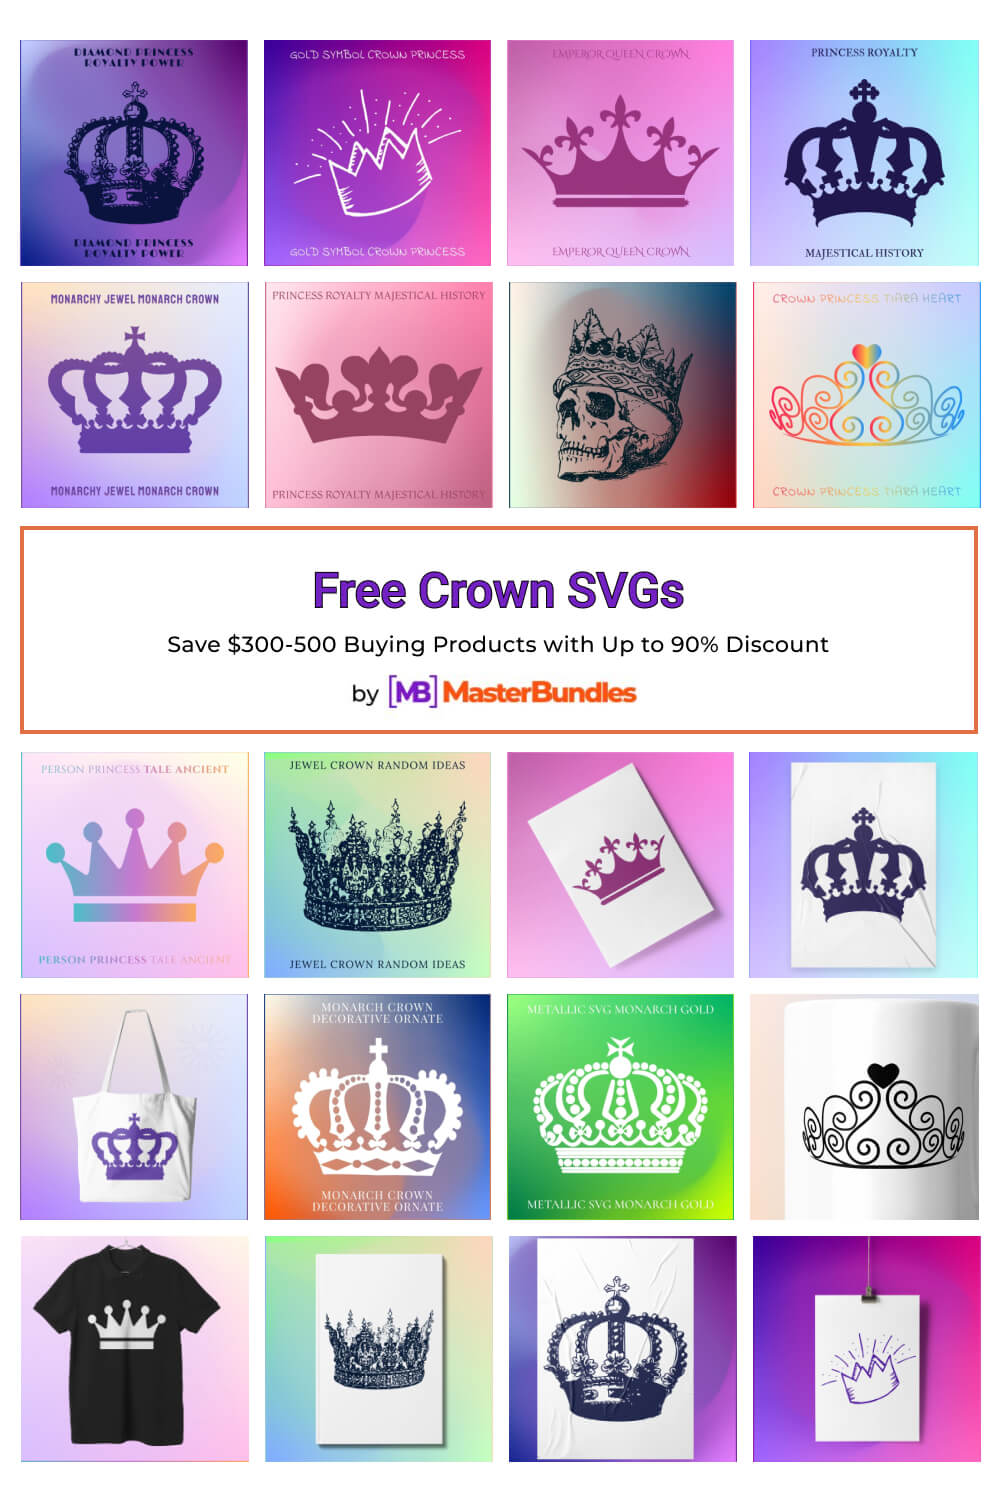 free crown svgs pinterest image.